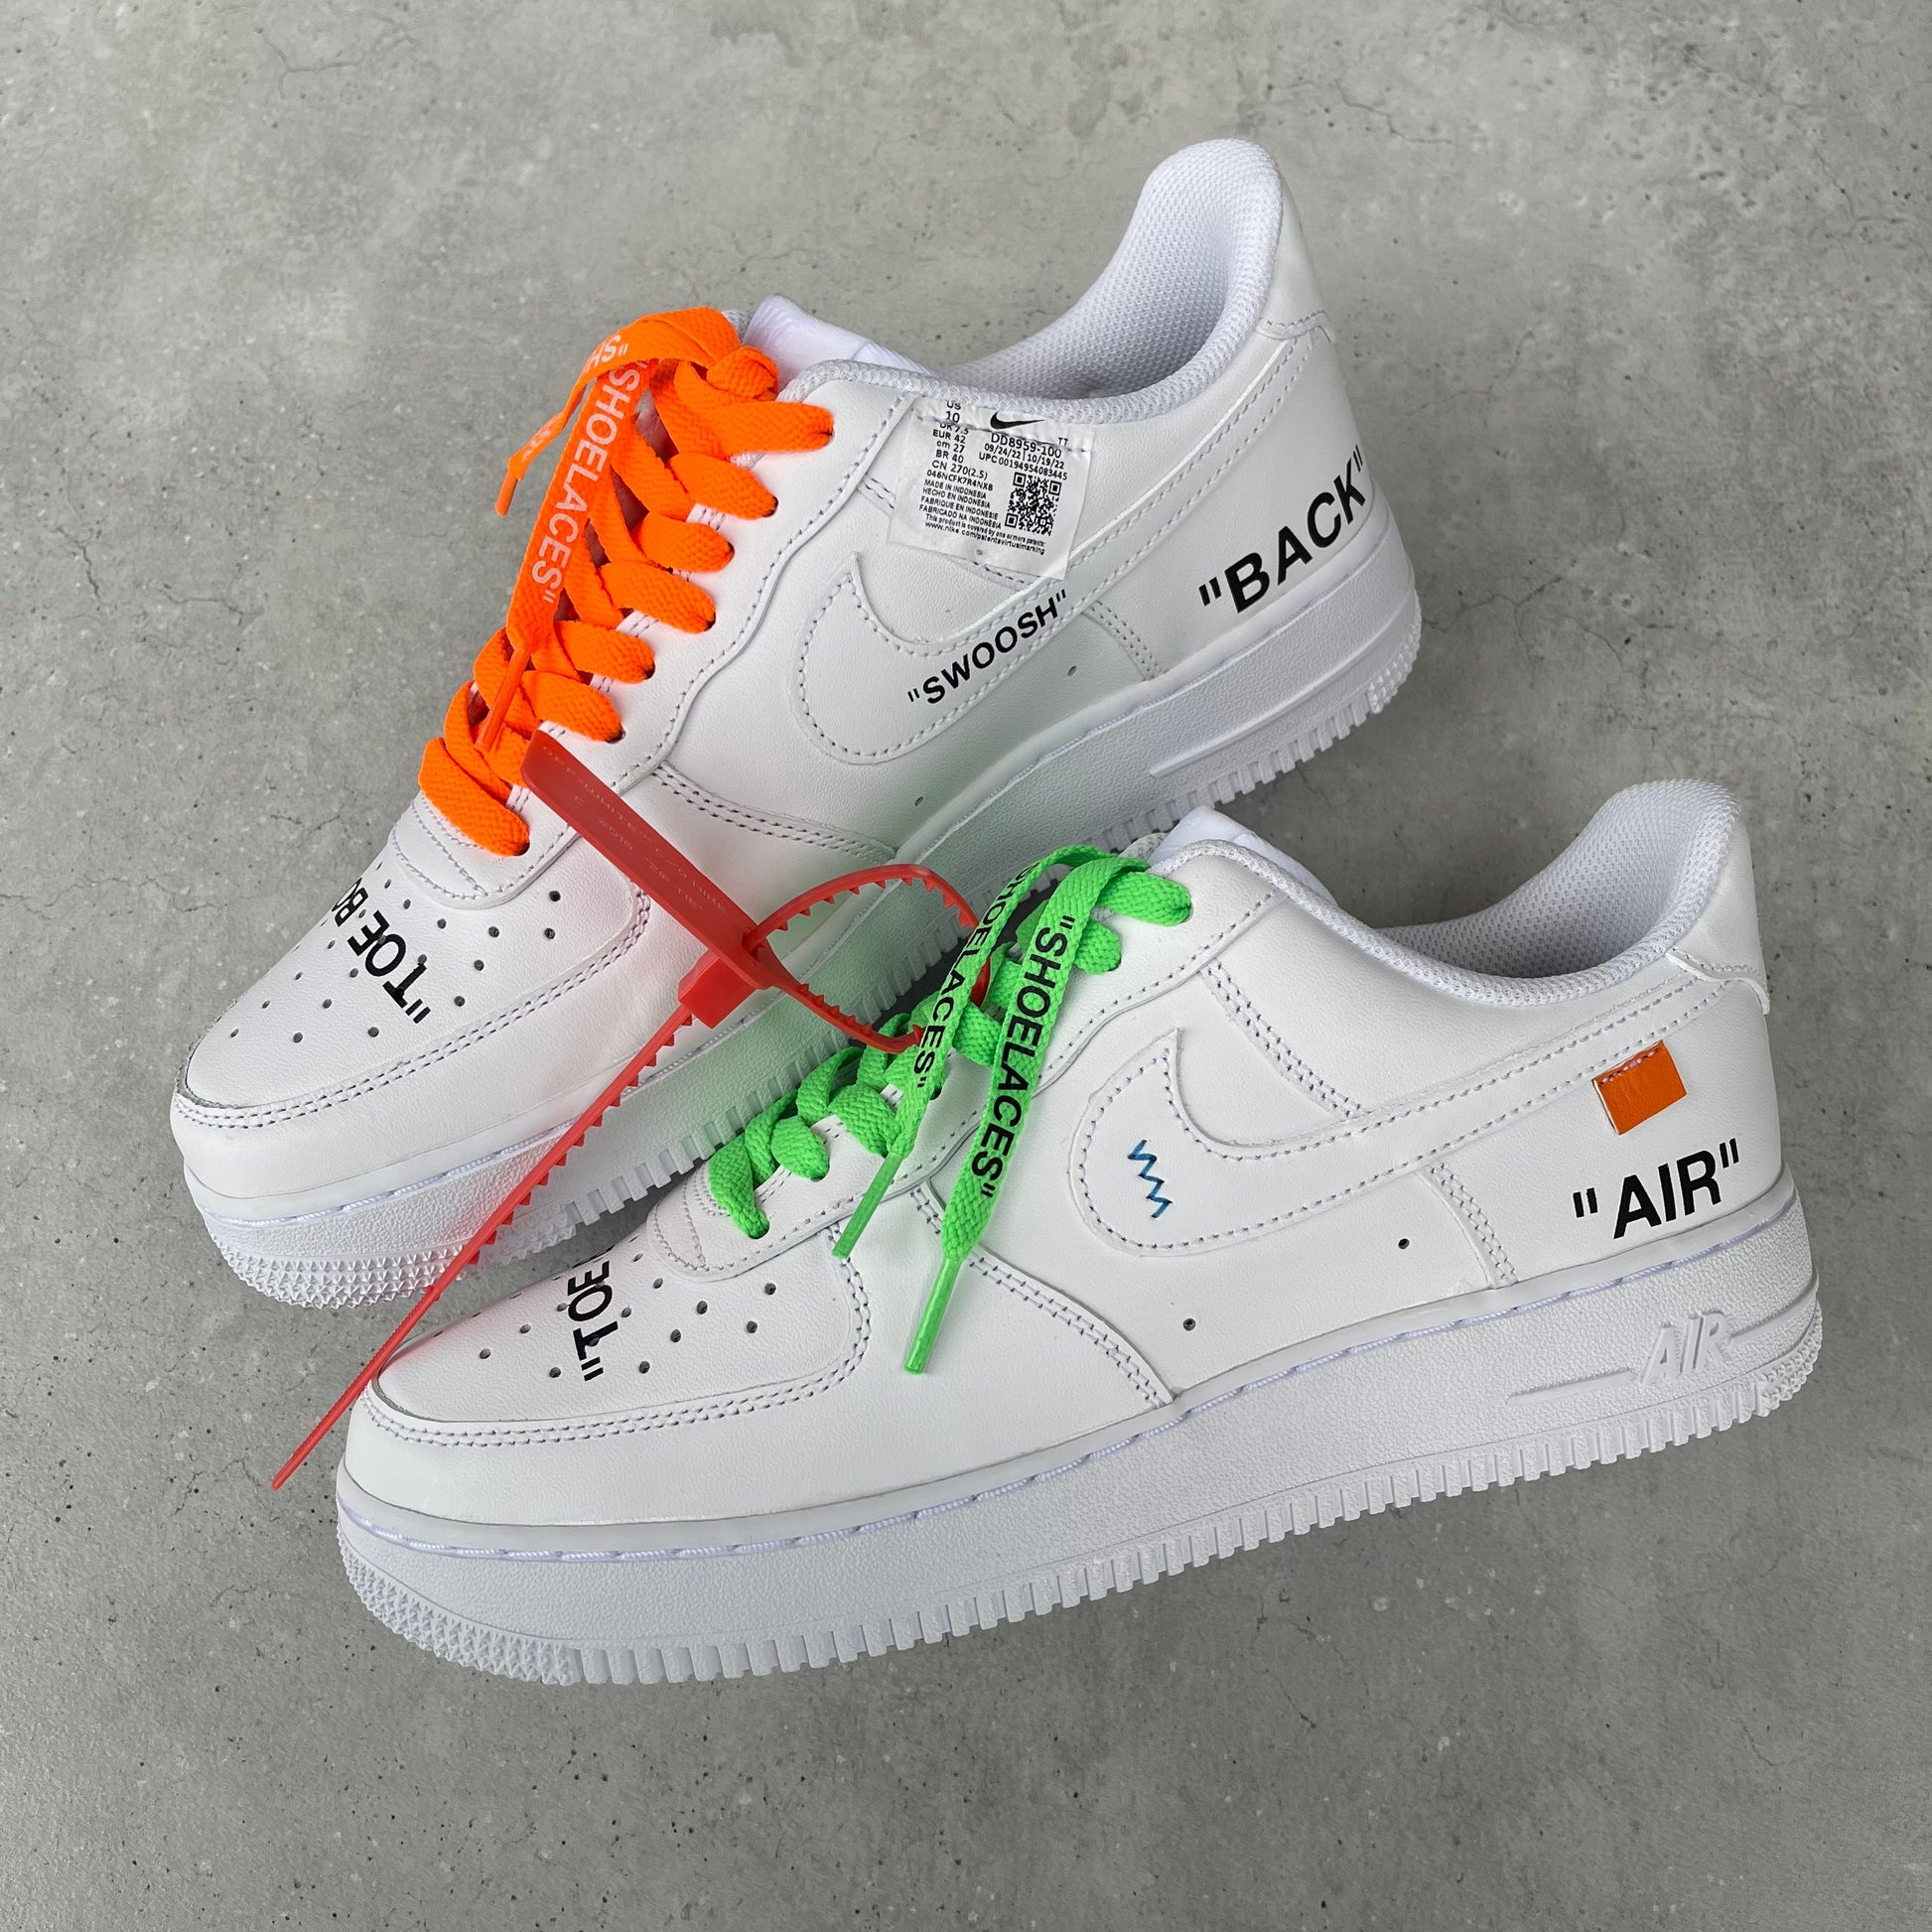 off white air force 1 custom Archives - WearTesters